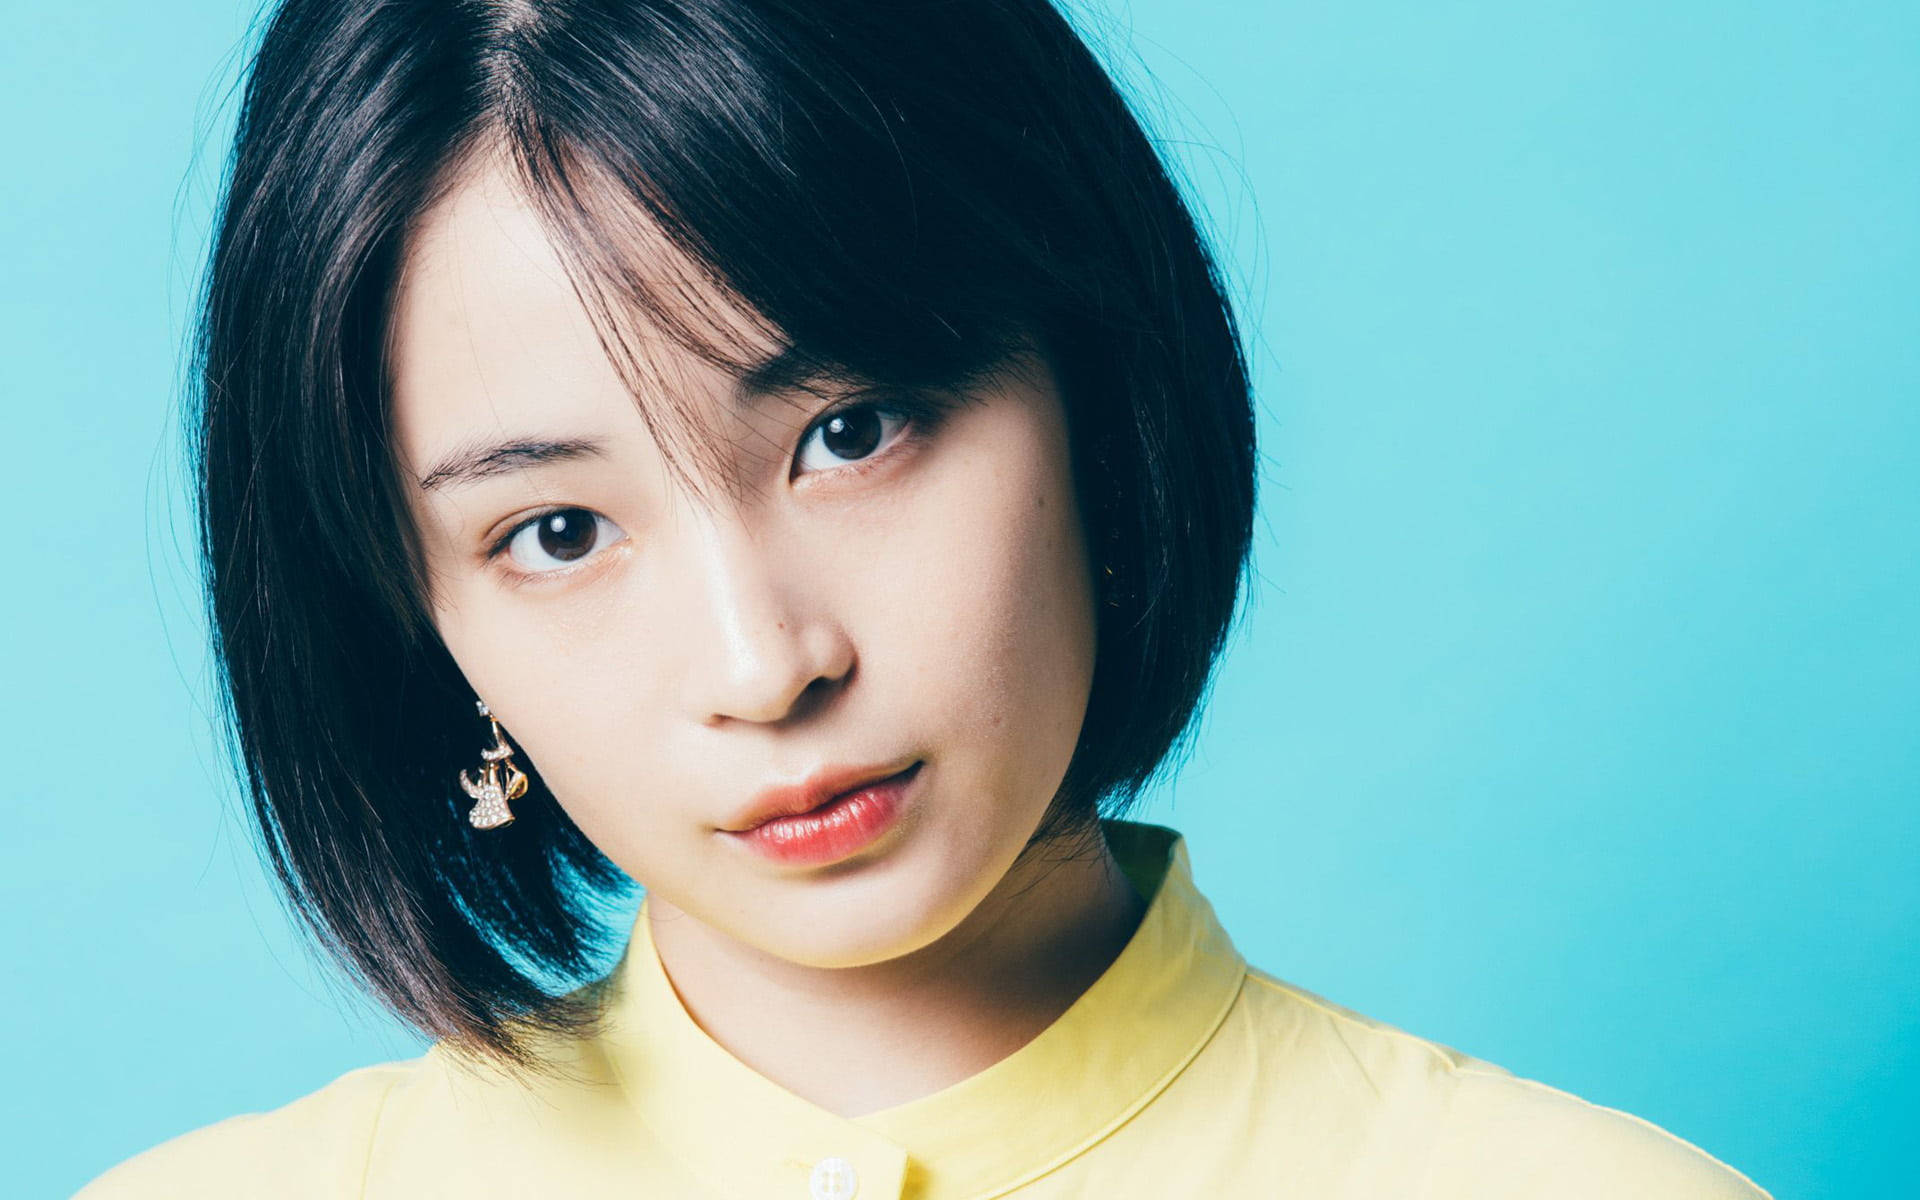 Japanese Girl With Short Hair Background